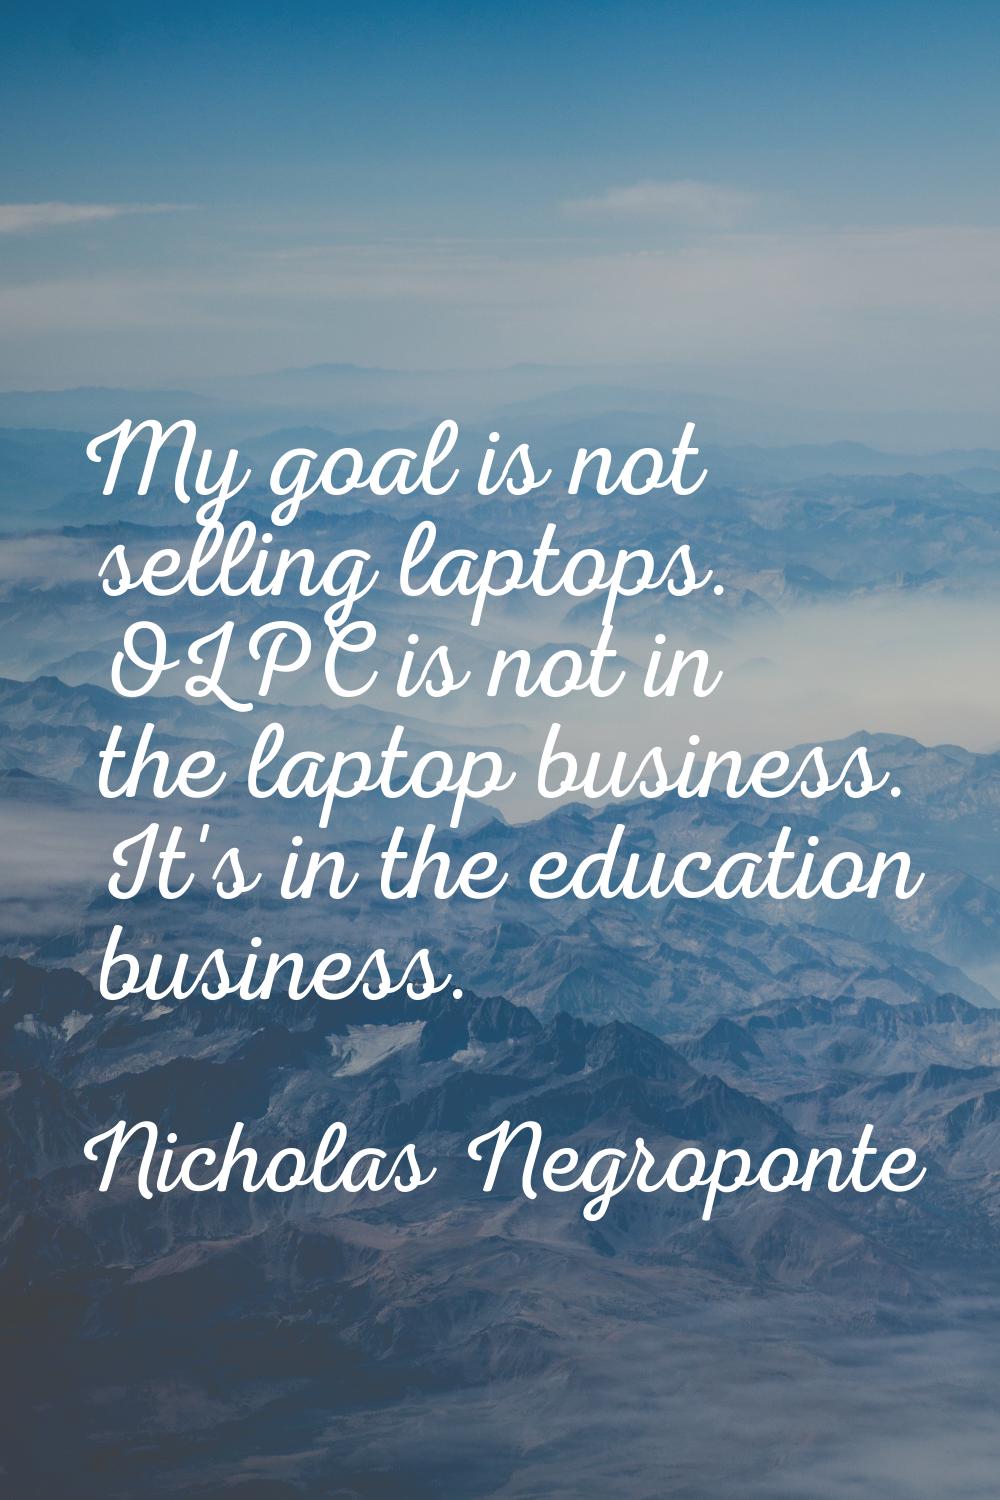 My goal is not selling laptops. OLPC is not in the laptop business. It's in the education business.